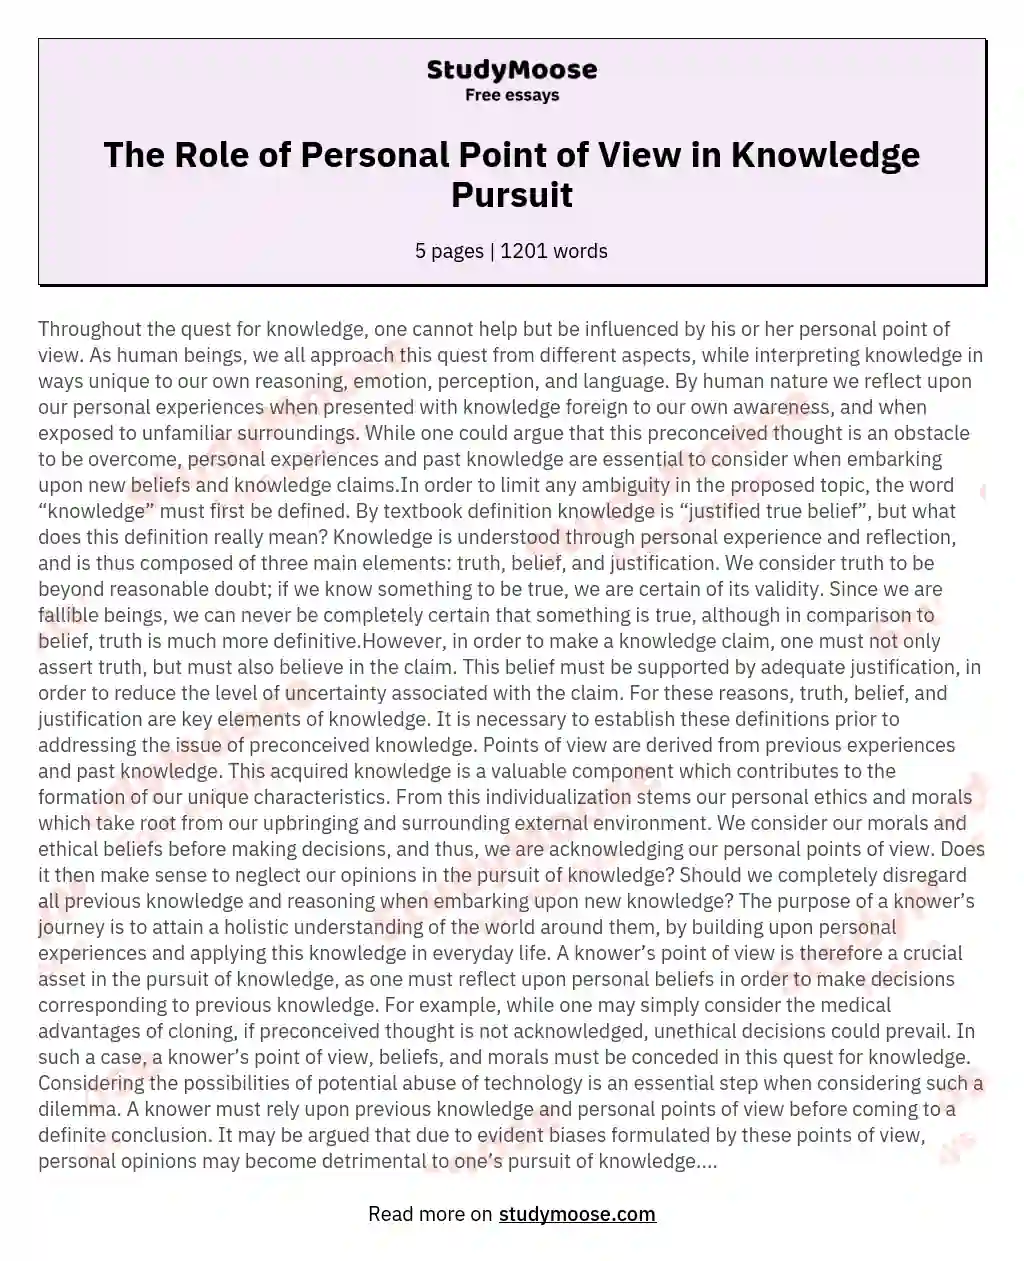 The Role of Personal Point of View in Knowledge Pursuit essay